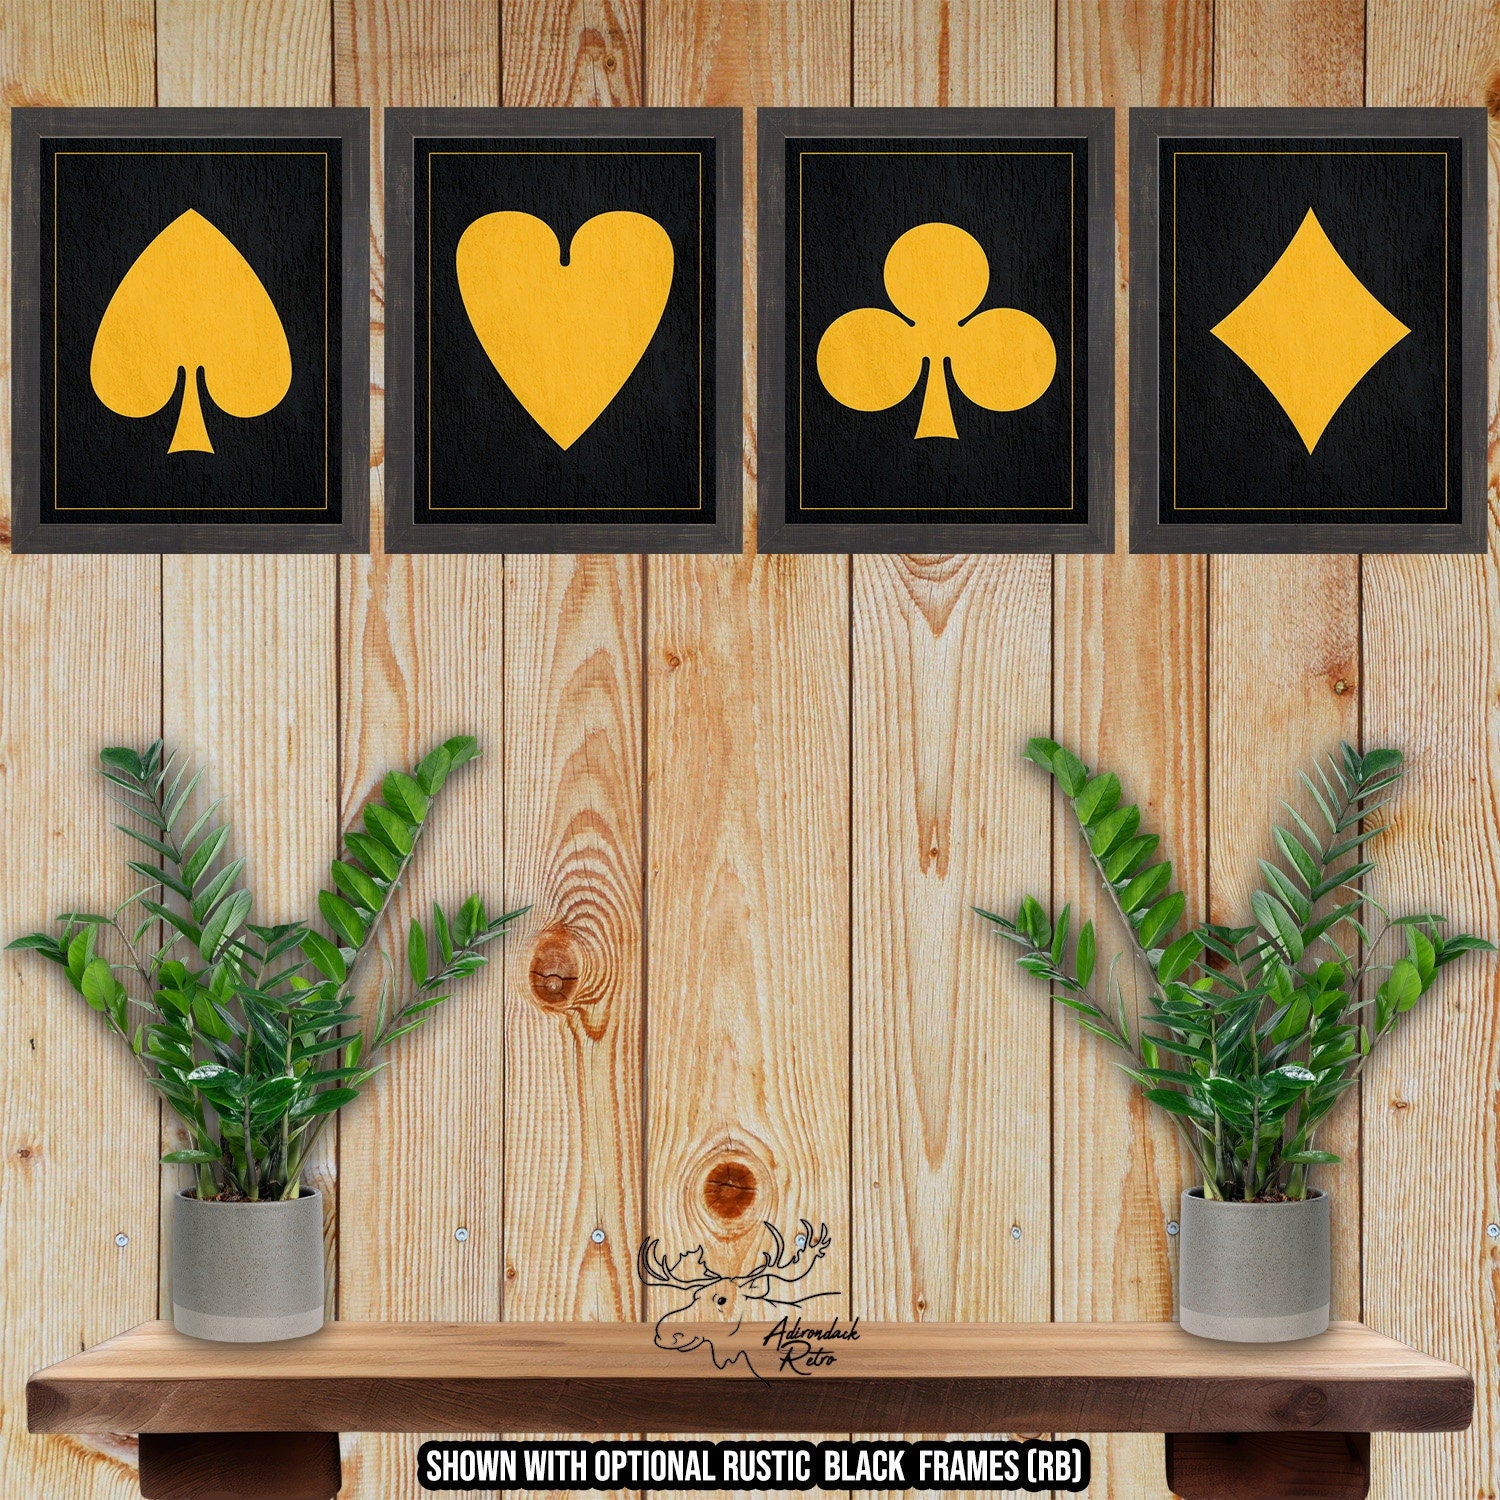 Four Poker Suits Set of Fine Art Prints - Black and Gold Playing Card Posters at Adirondack Retro